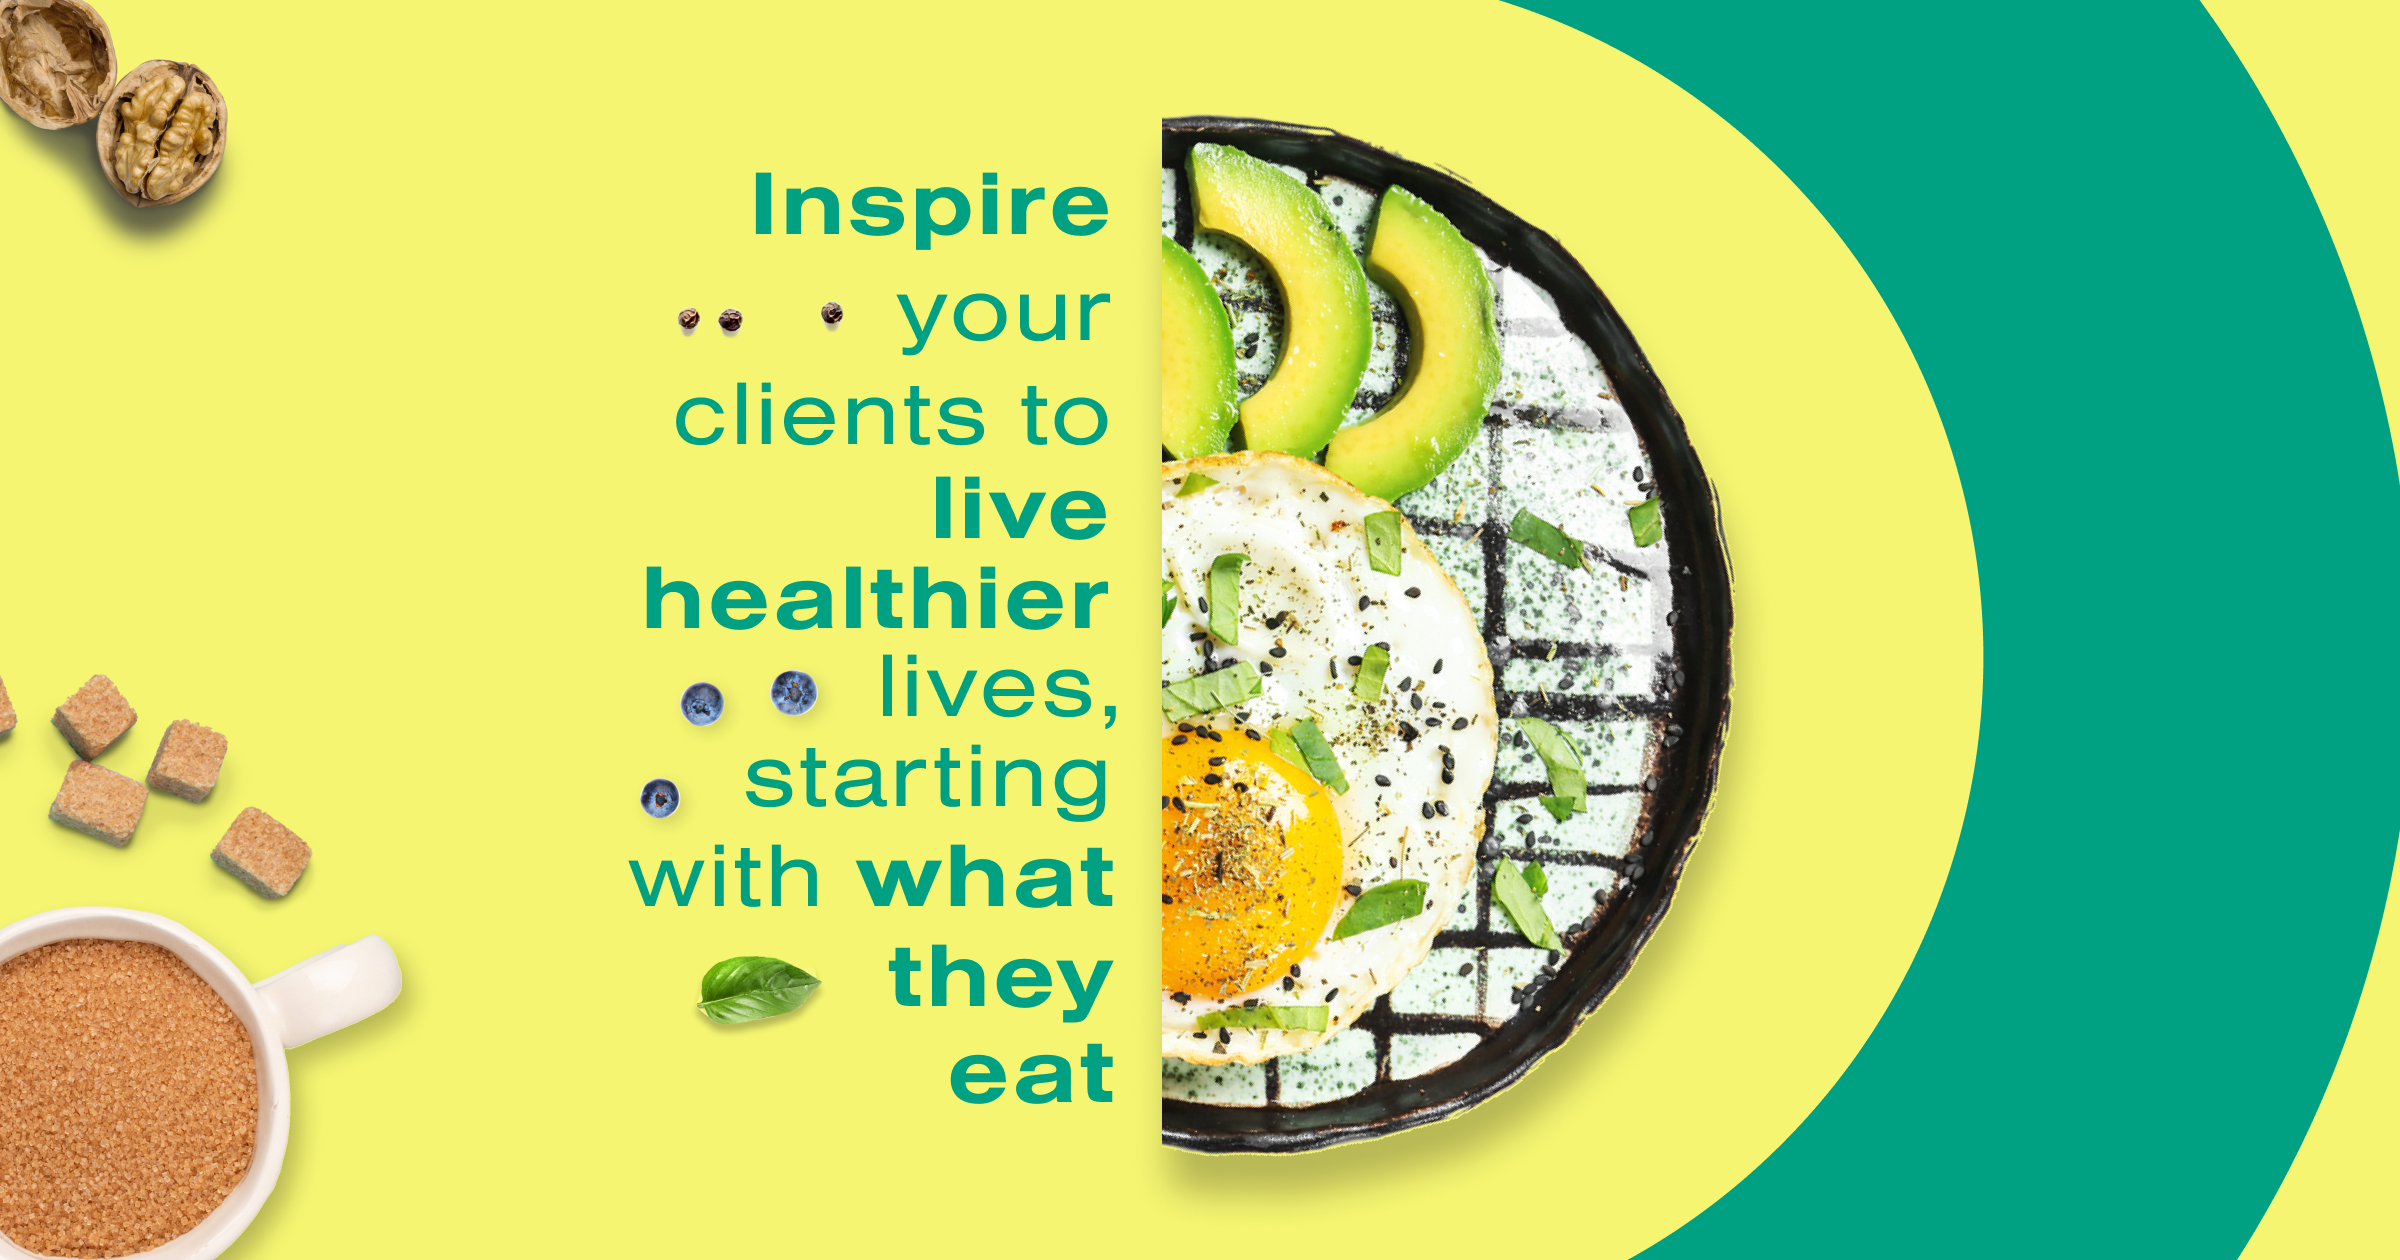 As a coach, you can inspire your clients to live healthier lives, starting with what they eat